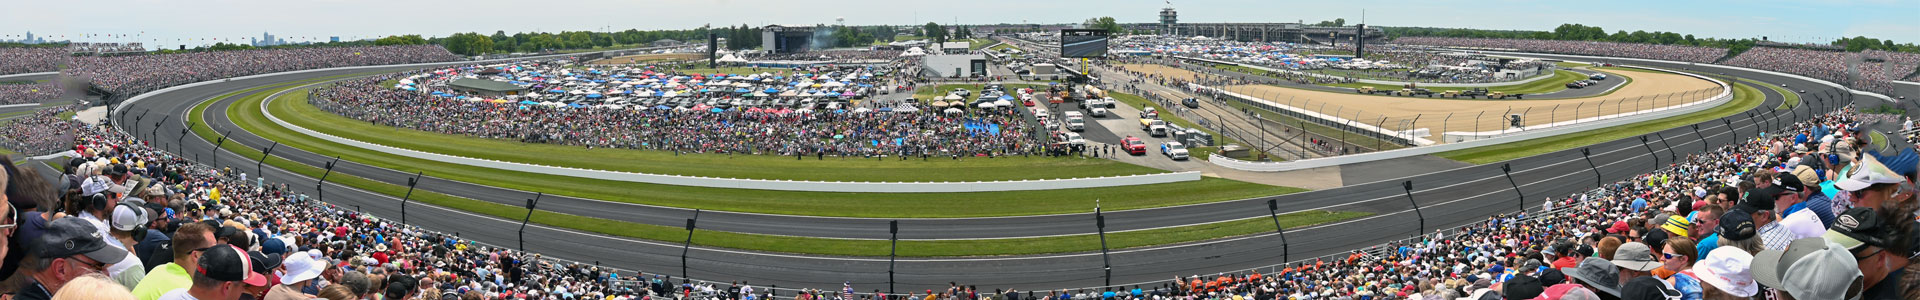 Indianapolis 500 Wide Shot